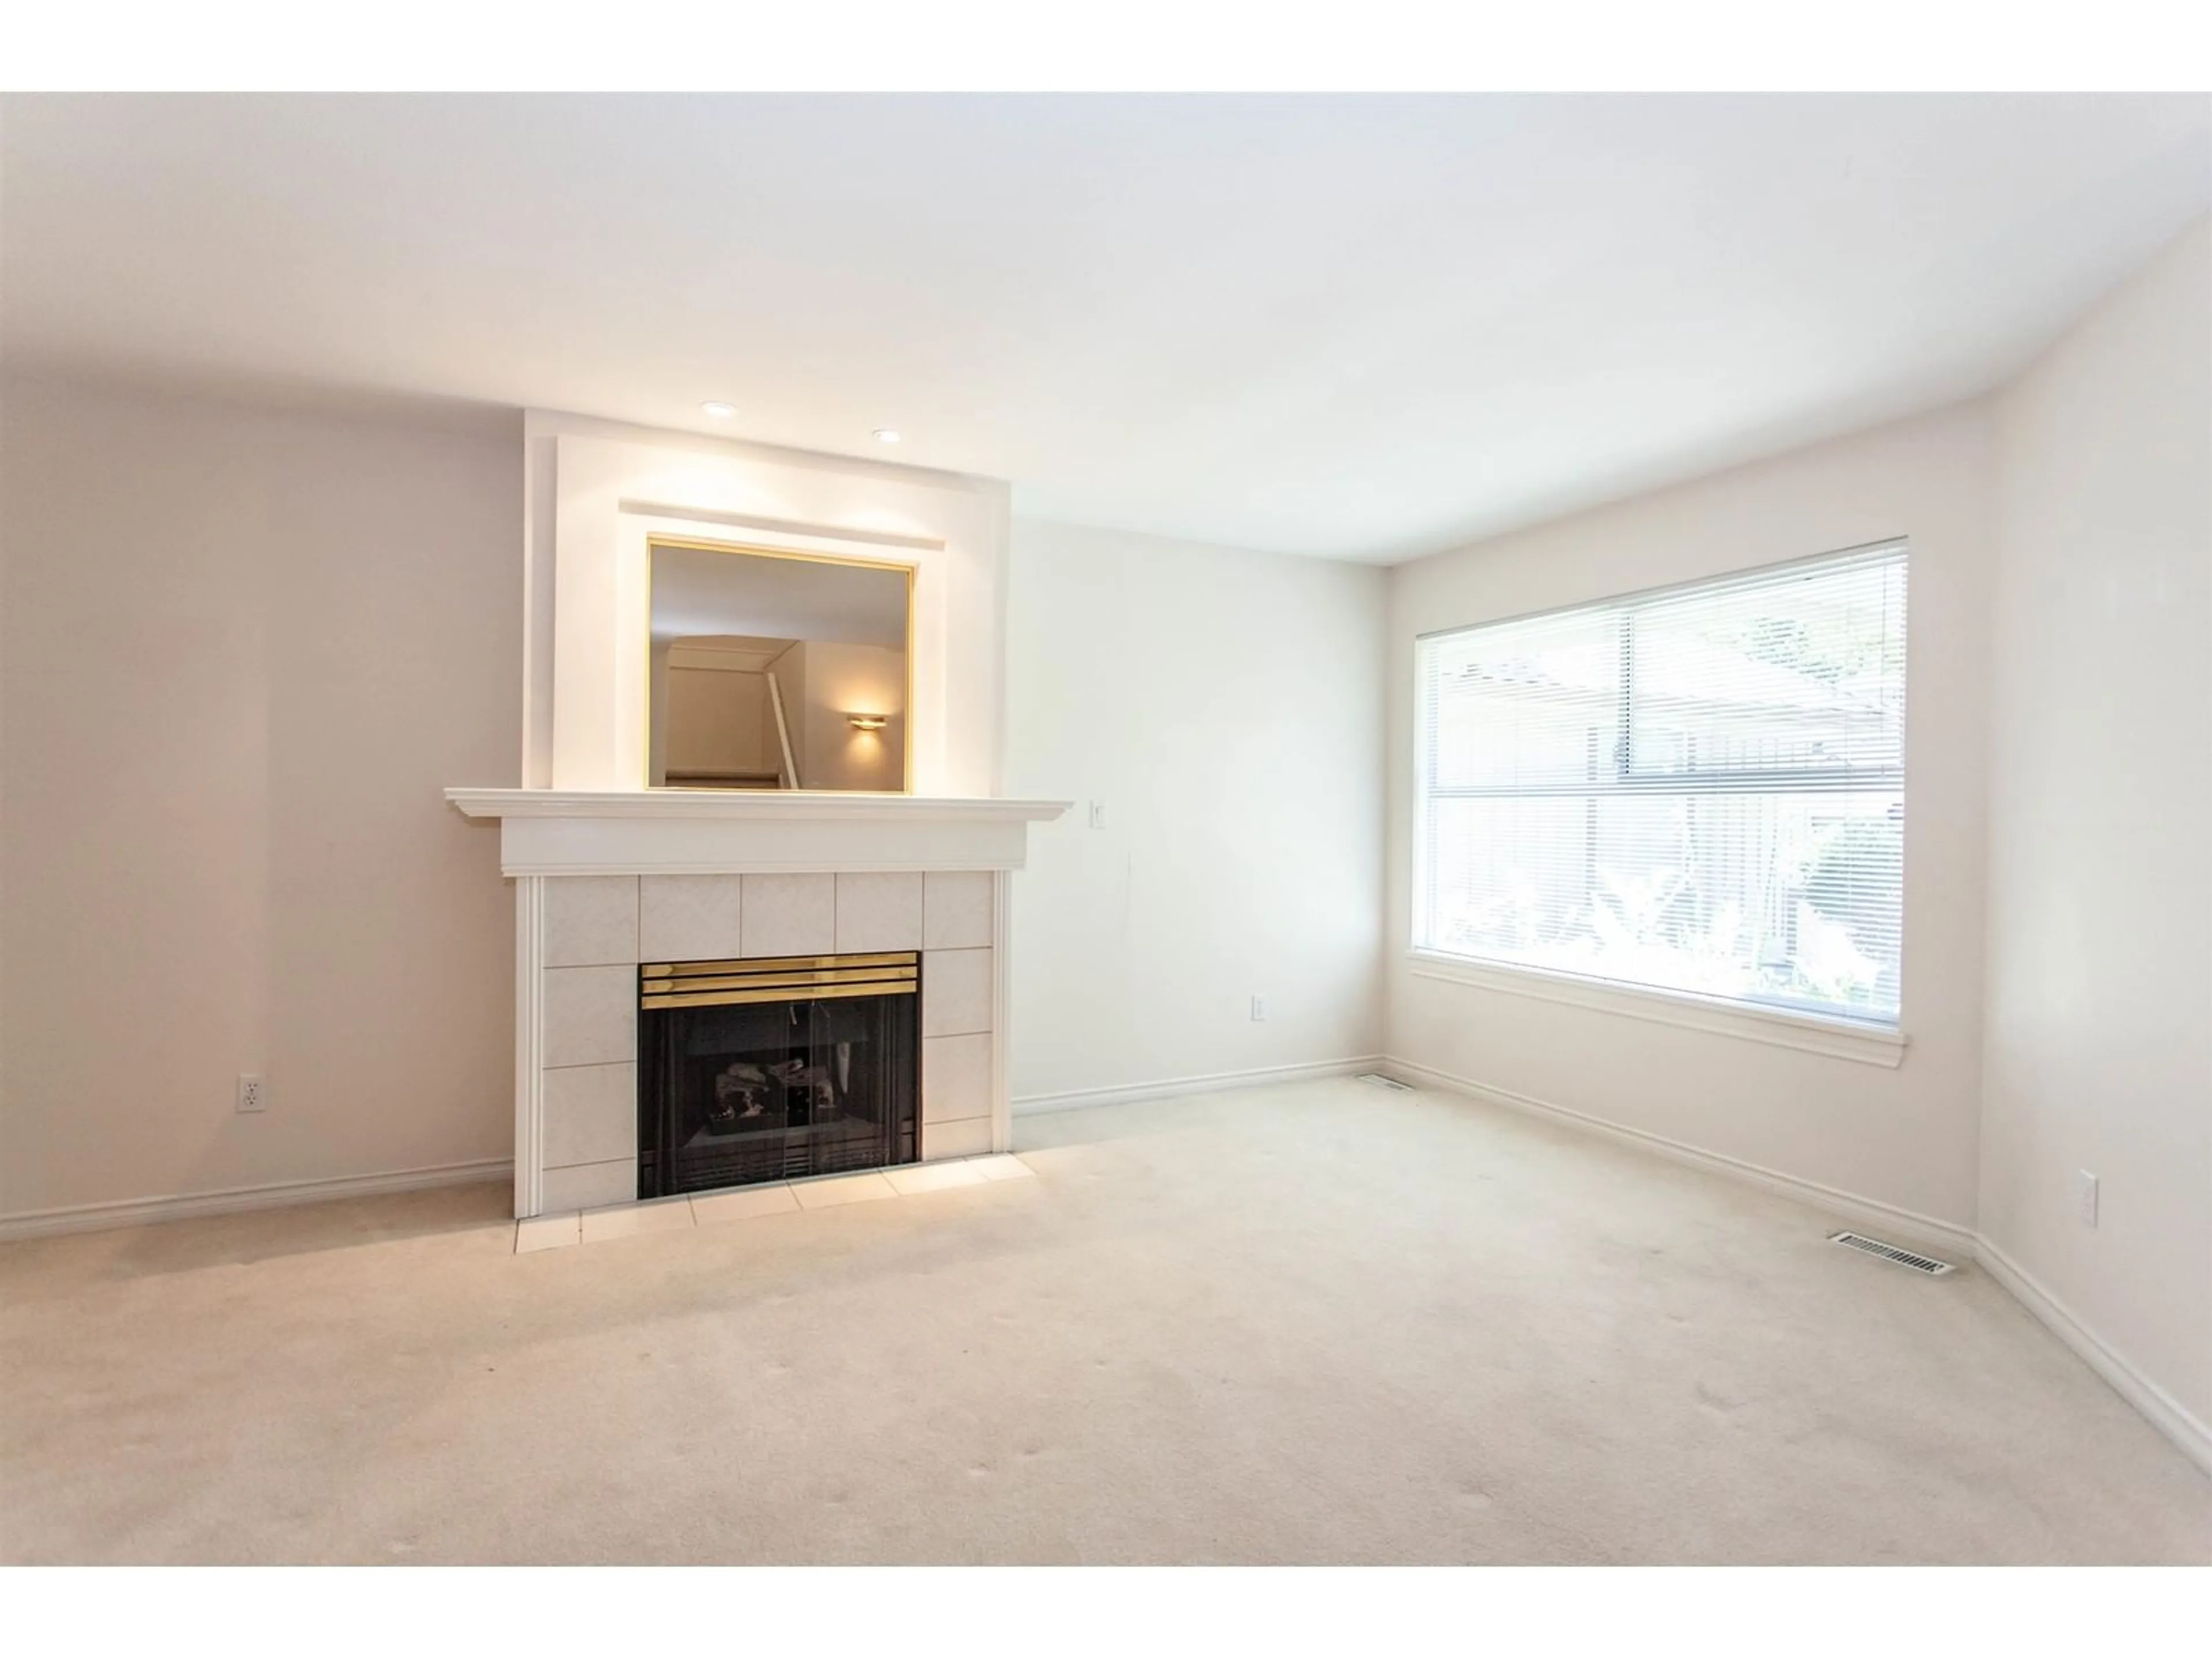 A pic of a room for 28 15860 82 AVENUE, Surrey British Columbia V3S8M4